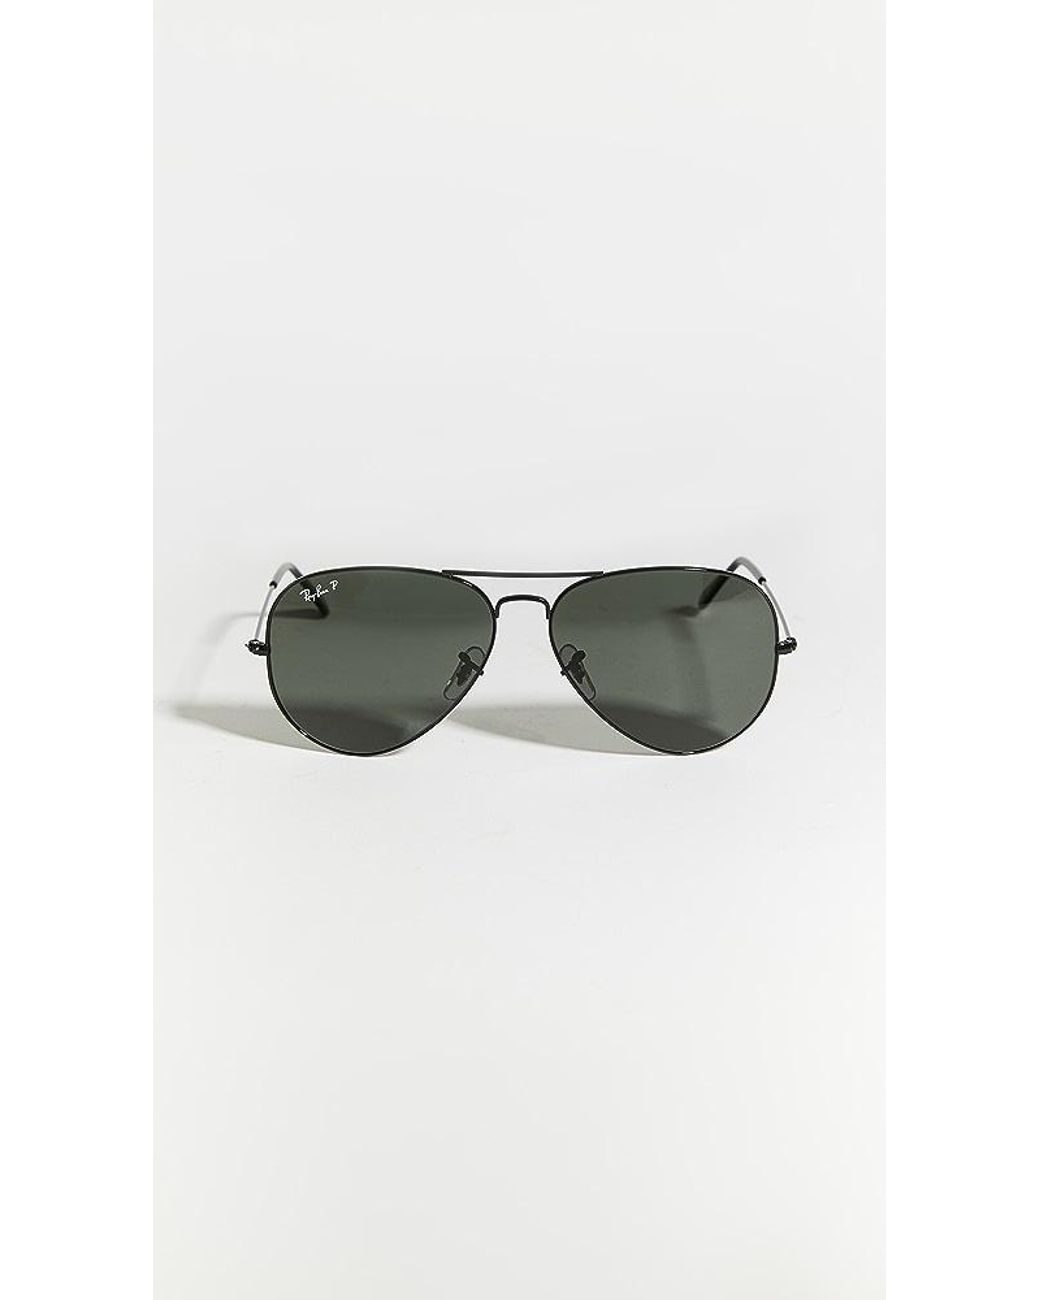 Ray-Ban Rb3025 Oversized Classic Aviator Polarized Sunglasses in Black |  Lyst